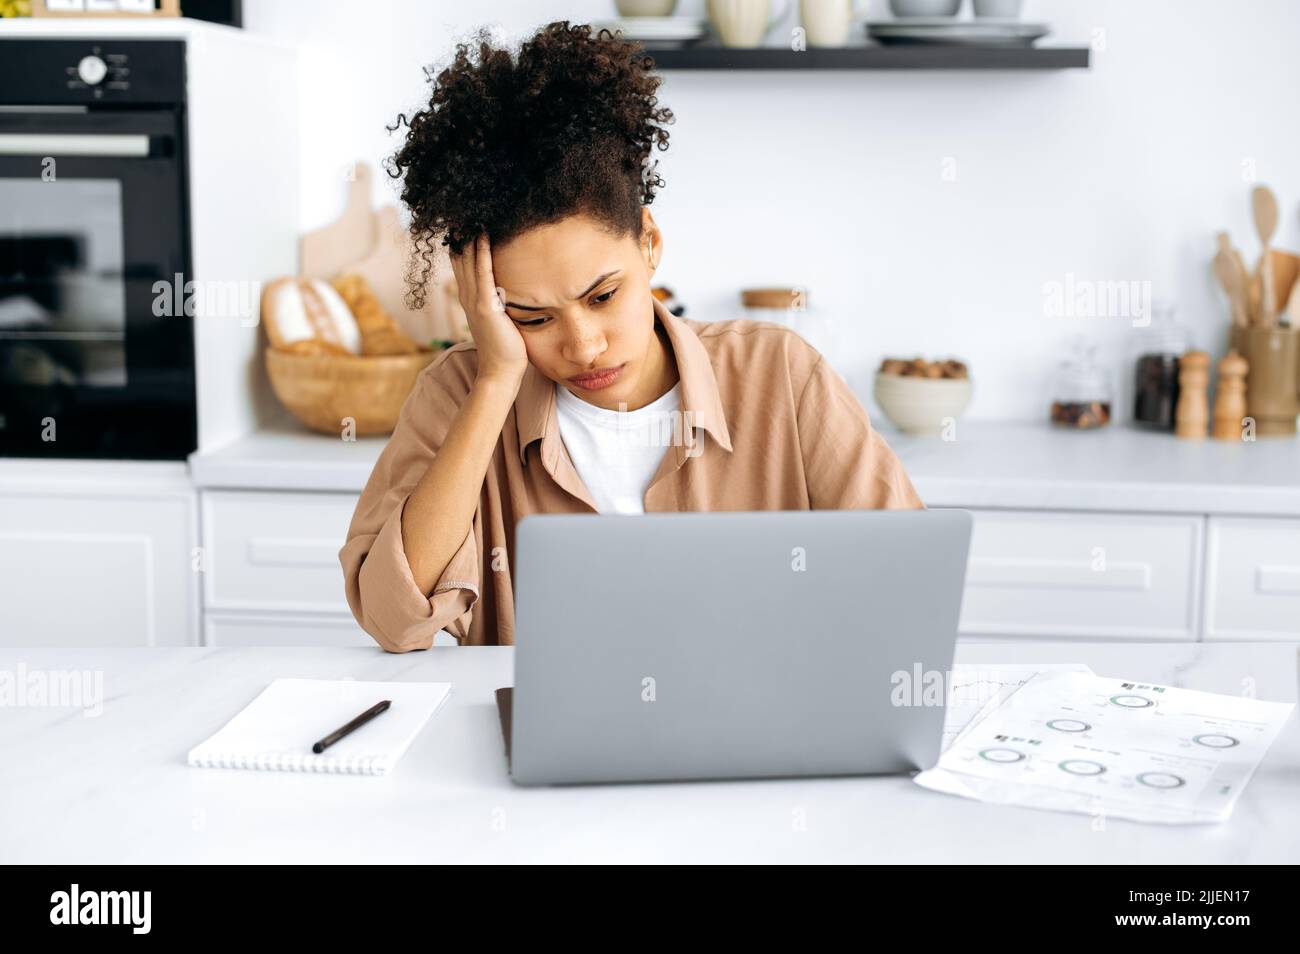 Overworked exhausted young african american woman, freelancer or student, working remotely from home, tired of boring online work, suffering from chronic fatigue, overwork, falls asleep at the desk Stock Photo